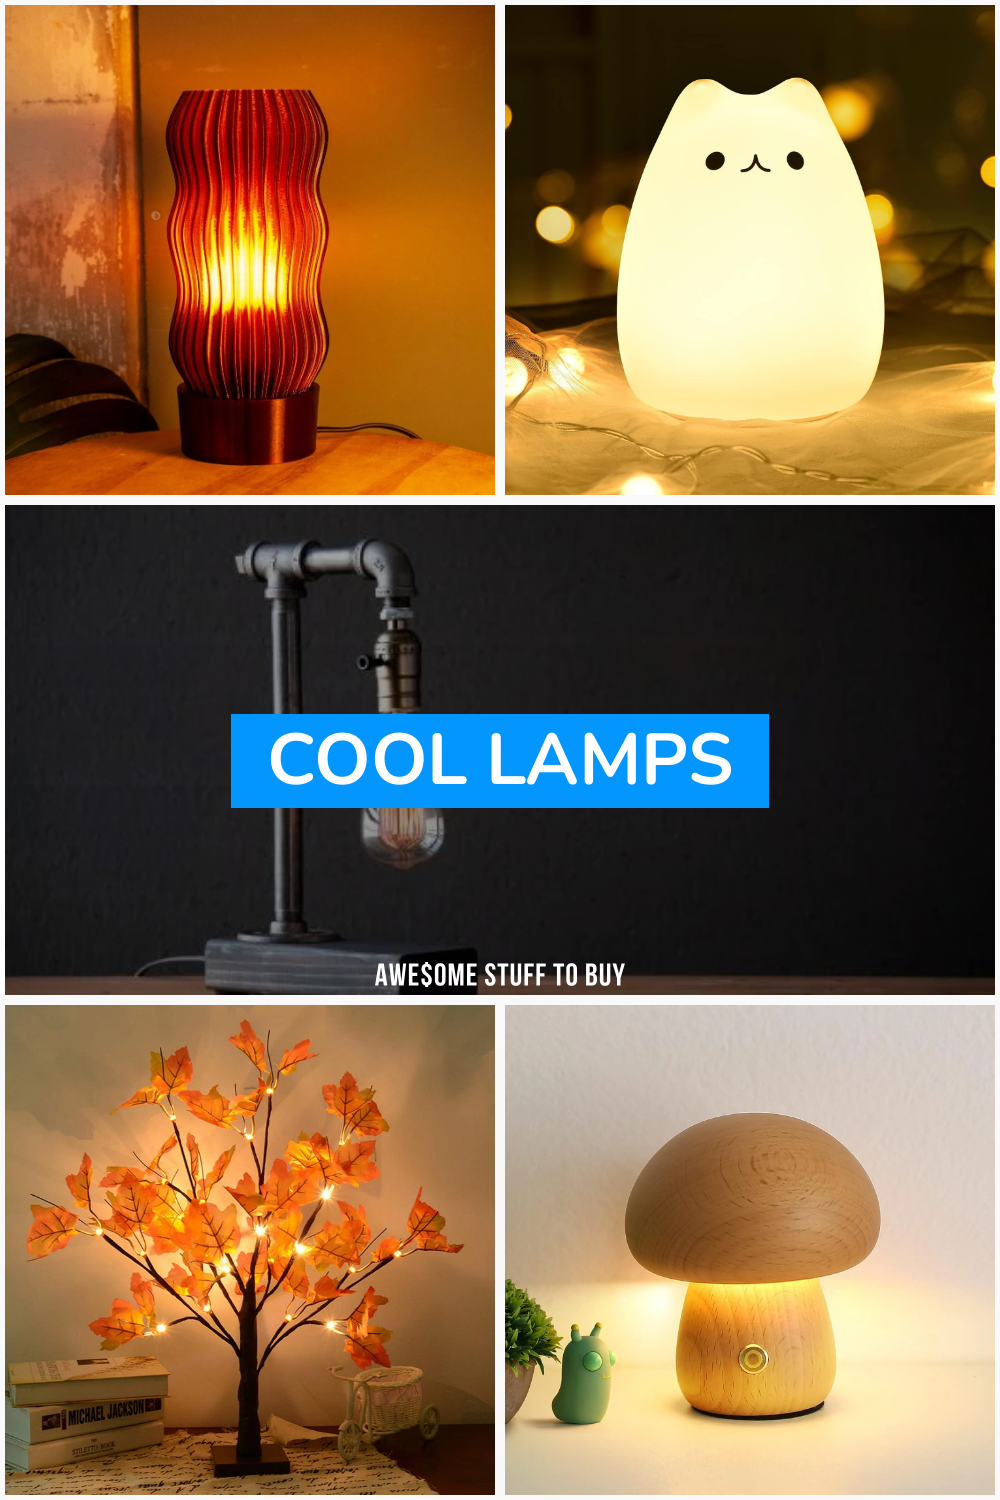 Cool Lamps // Awesome Stuff to Buy